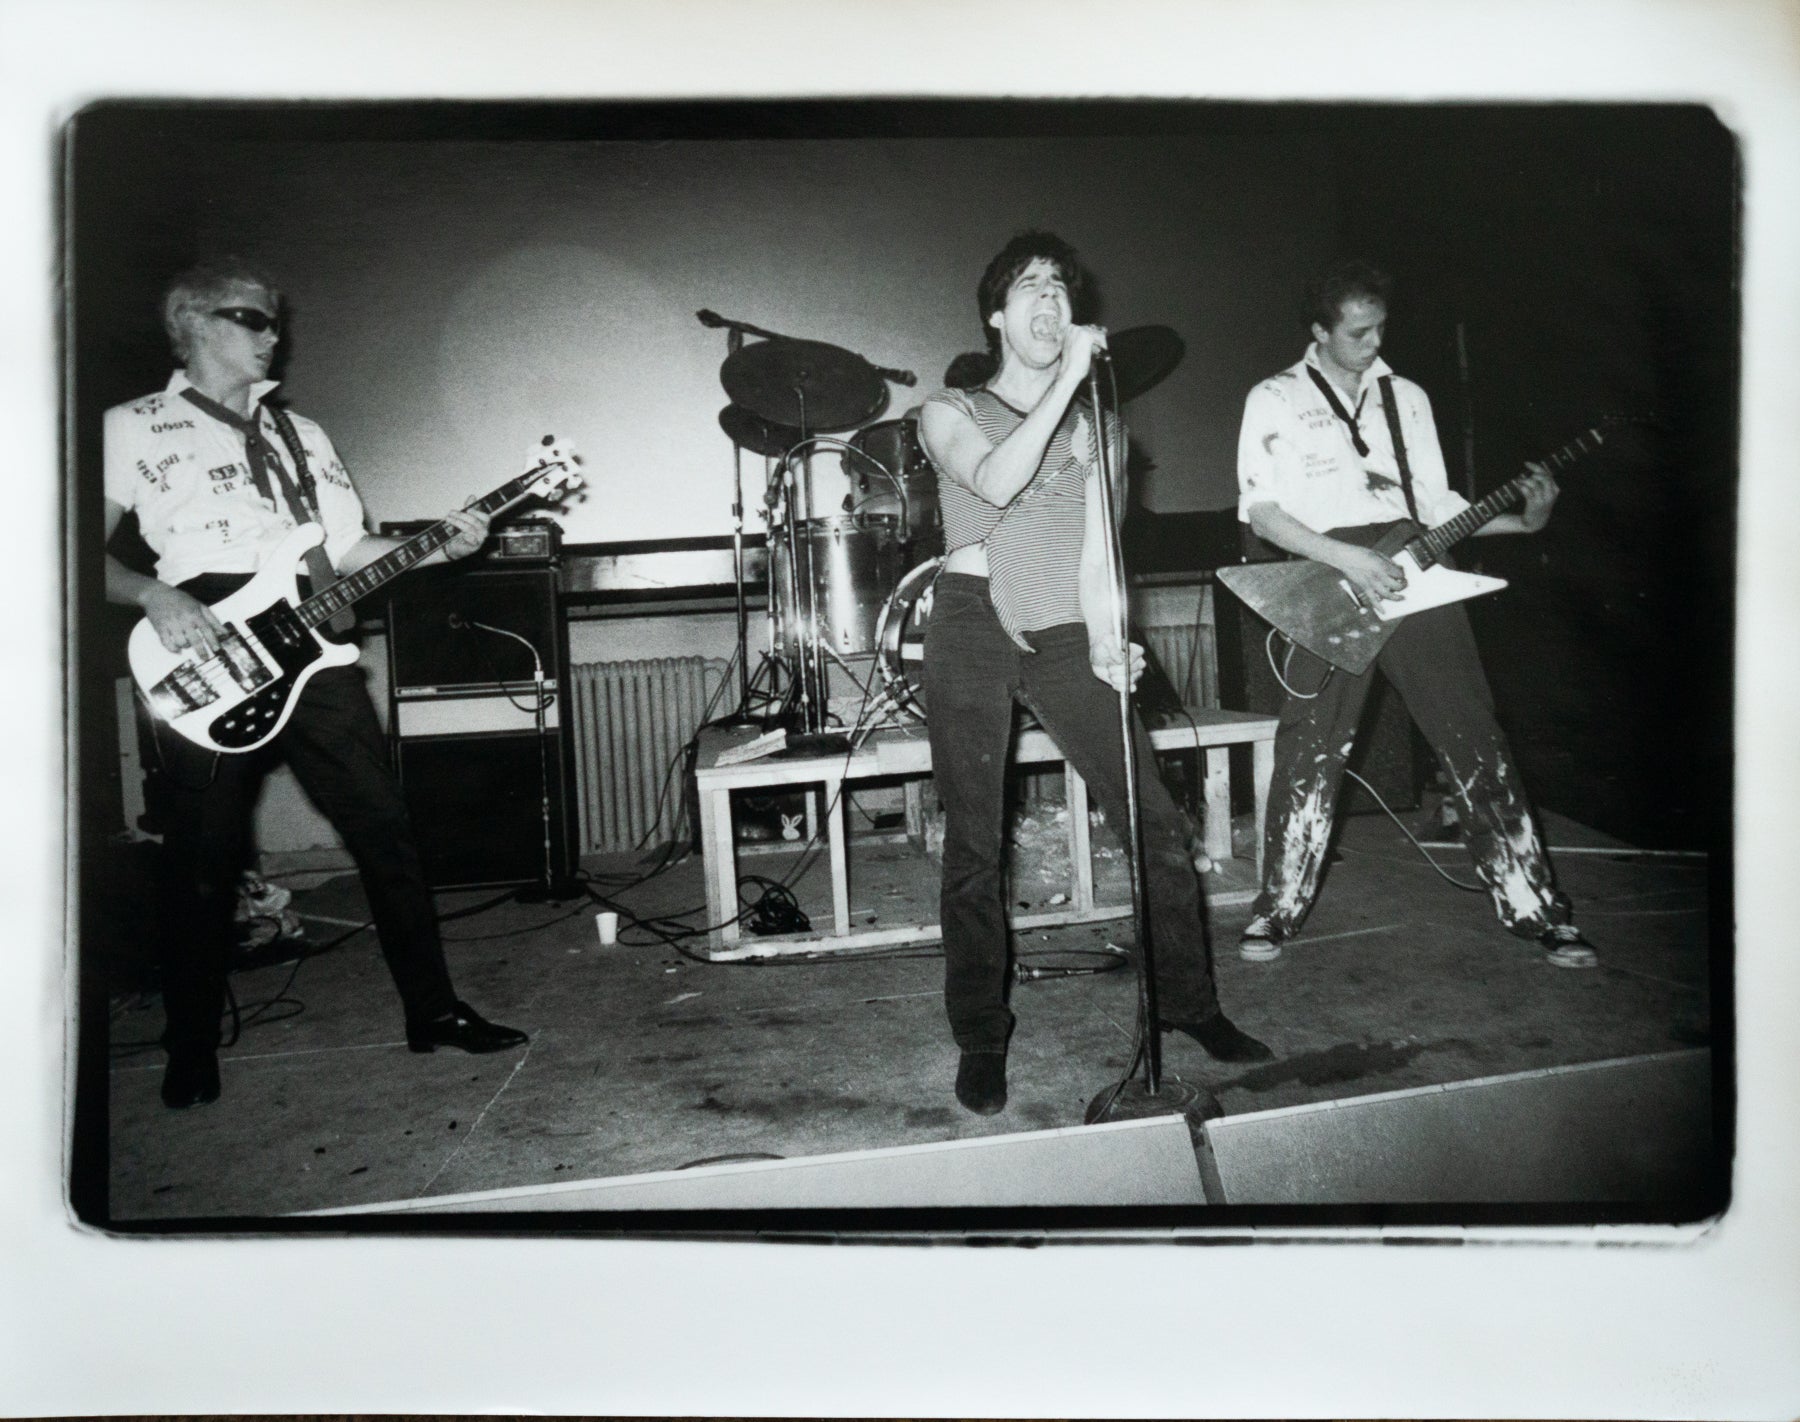 The Misfits at the Shock Theatre 1977 (FP4 19)